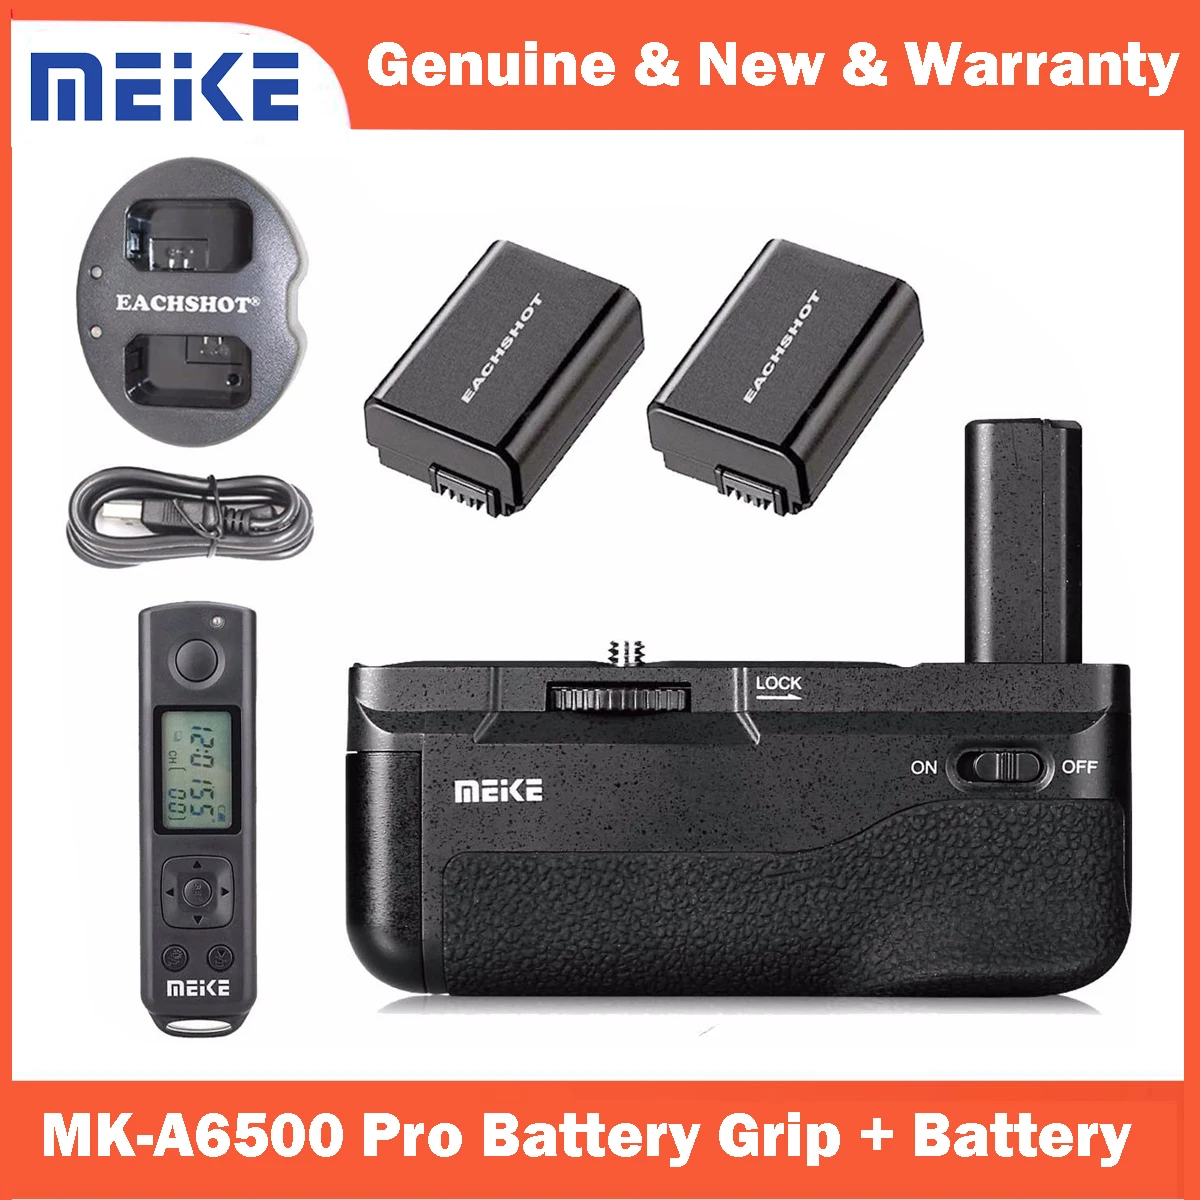 

Meike MK-A6500 Pro Battery Grip Built-in Remote Control 100M Vertical-Shooting with FW50 Battery for Sony A6500 Mirroless Camera